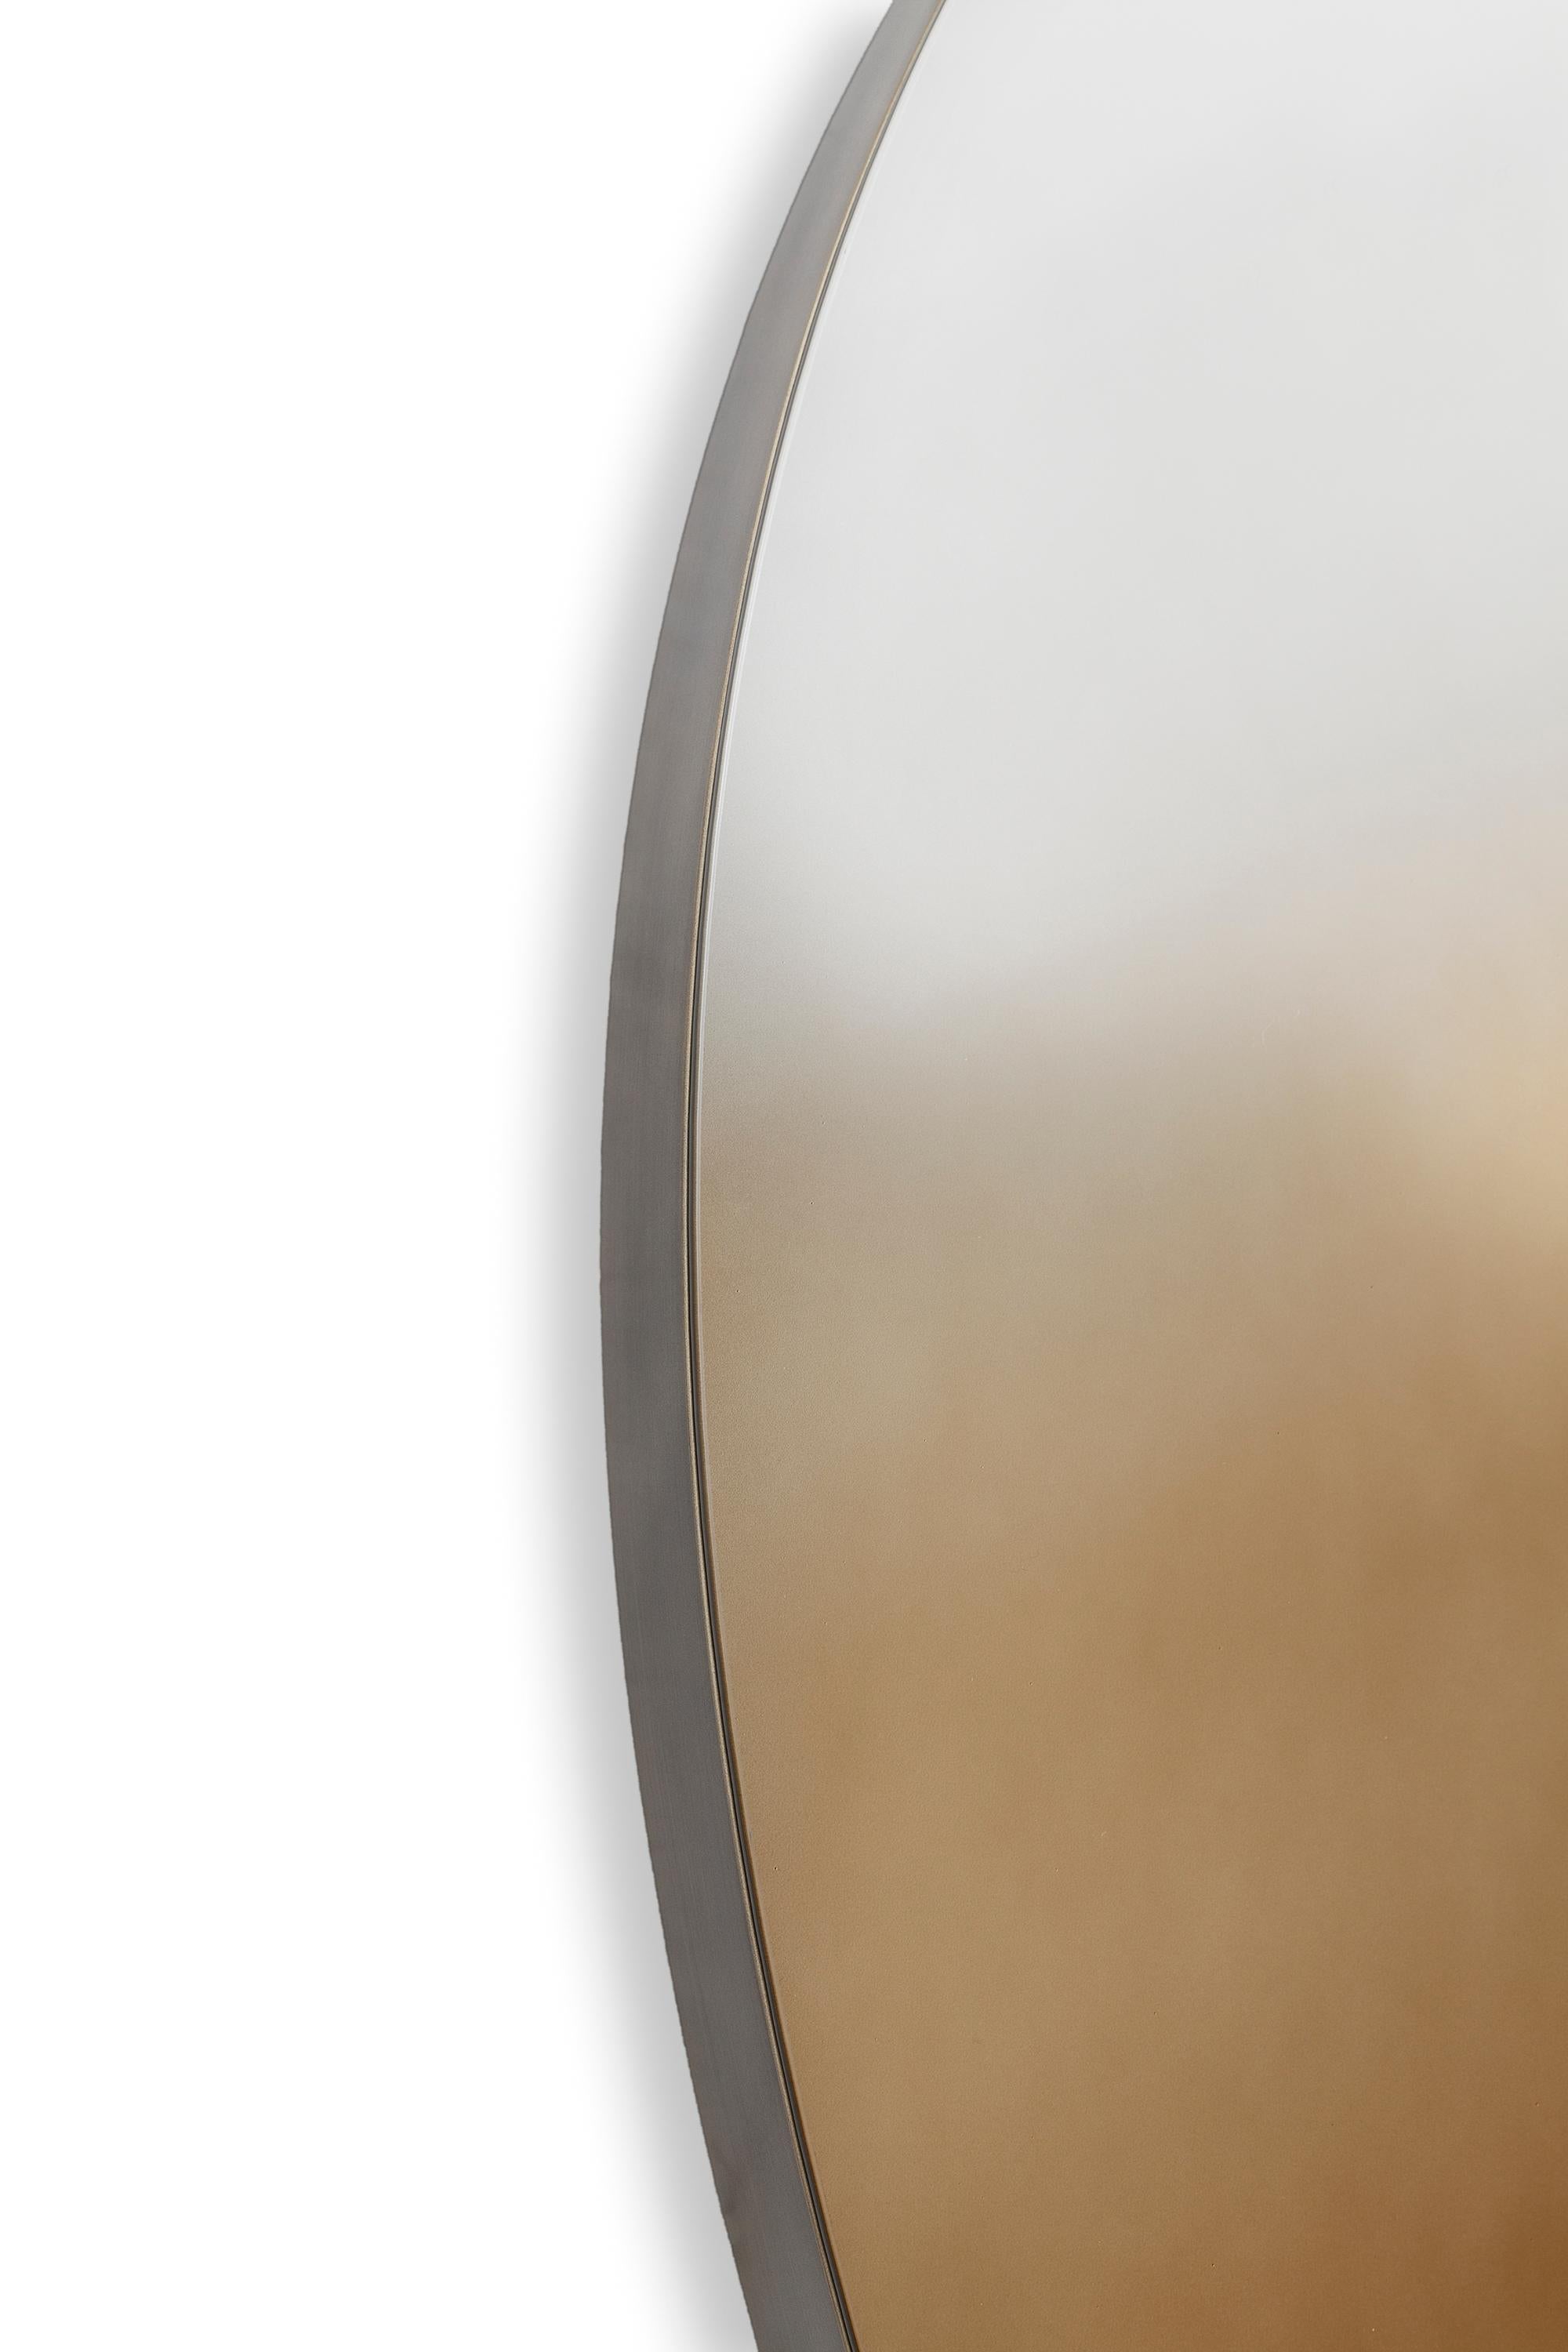 Minimalist  Specchio #2, Duo Oval Mirror in Teal and Beige  For Sale